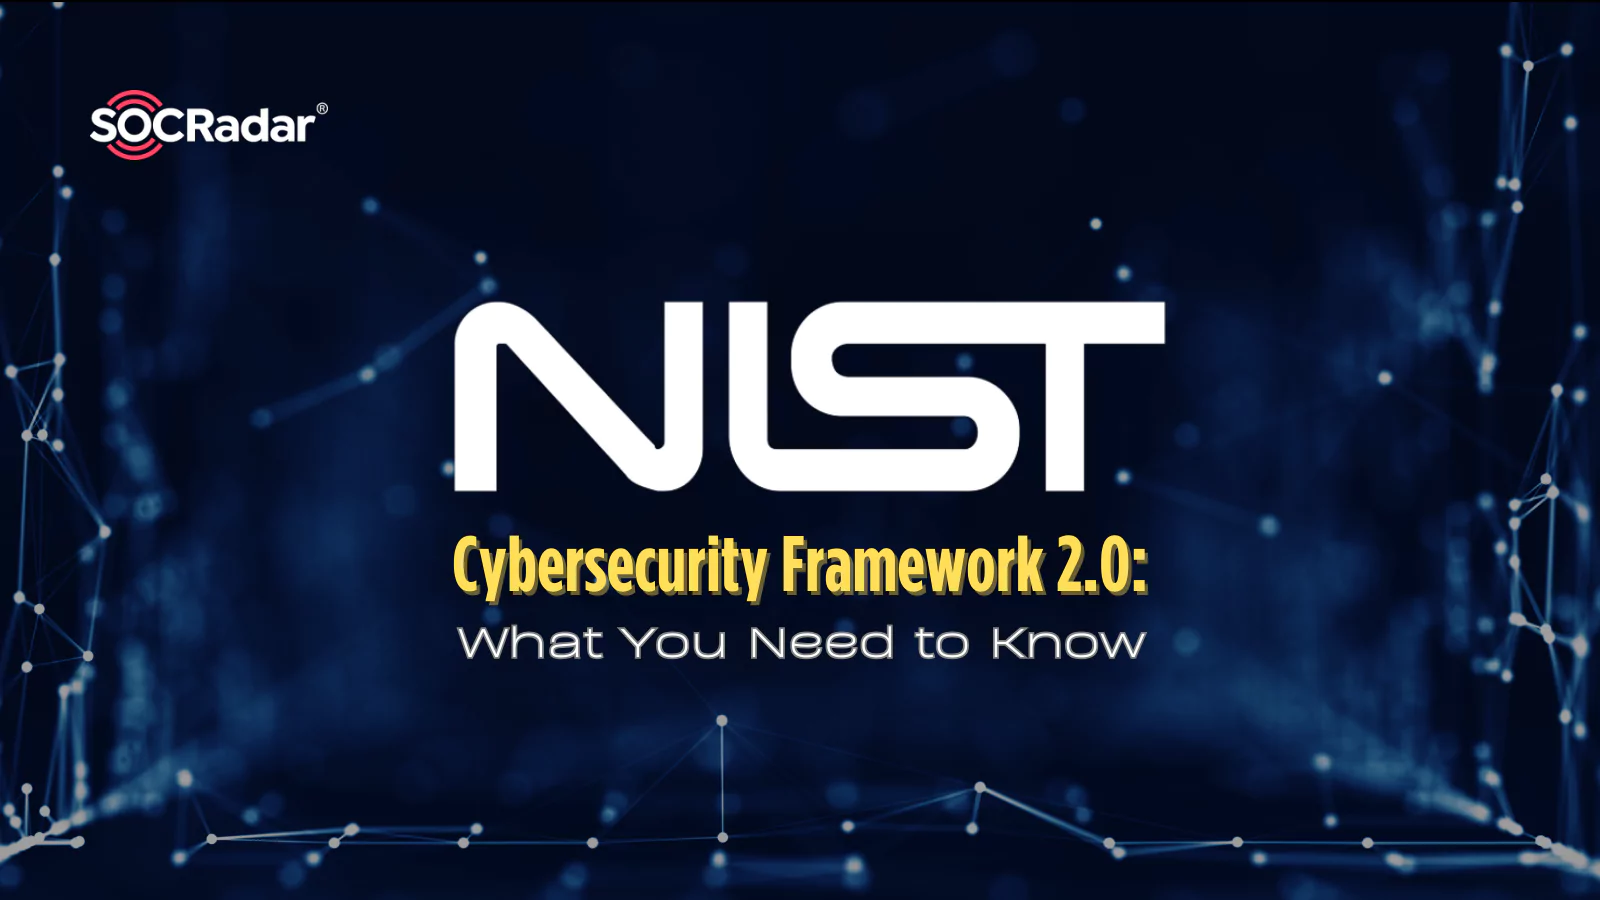 SOCRadar® Cyber Intelligence Inc. | NIST Cybersecurity Framework 2.0: What You Need to Know